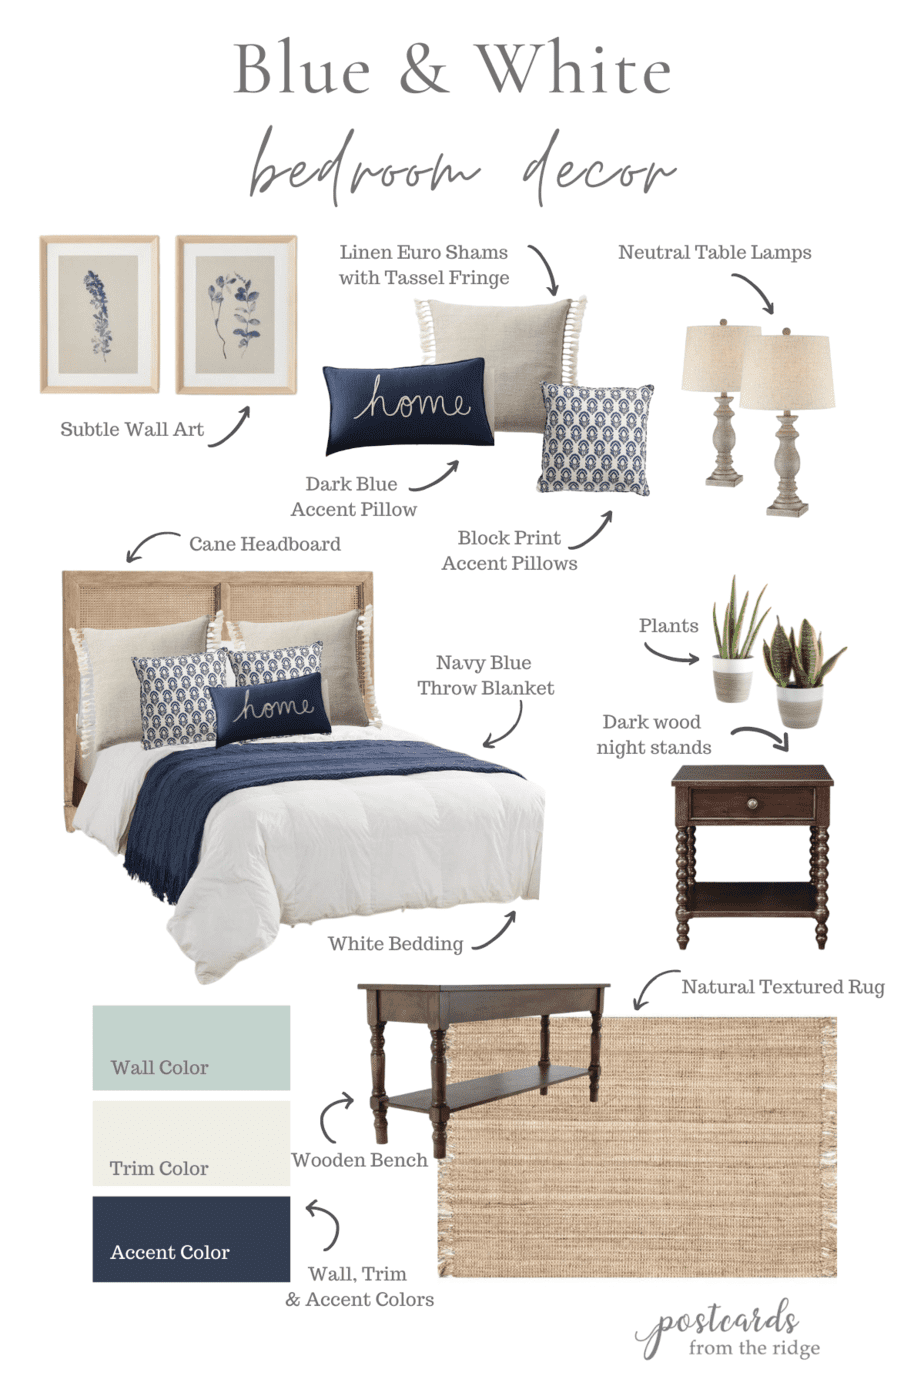 Bedroom Makeover Plan & All of Your bedding questions answered